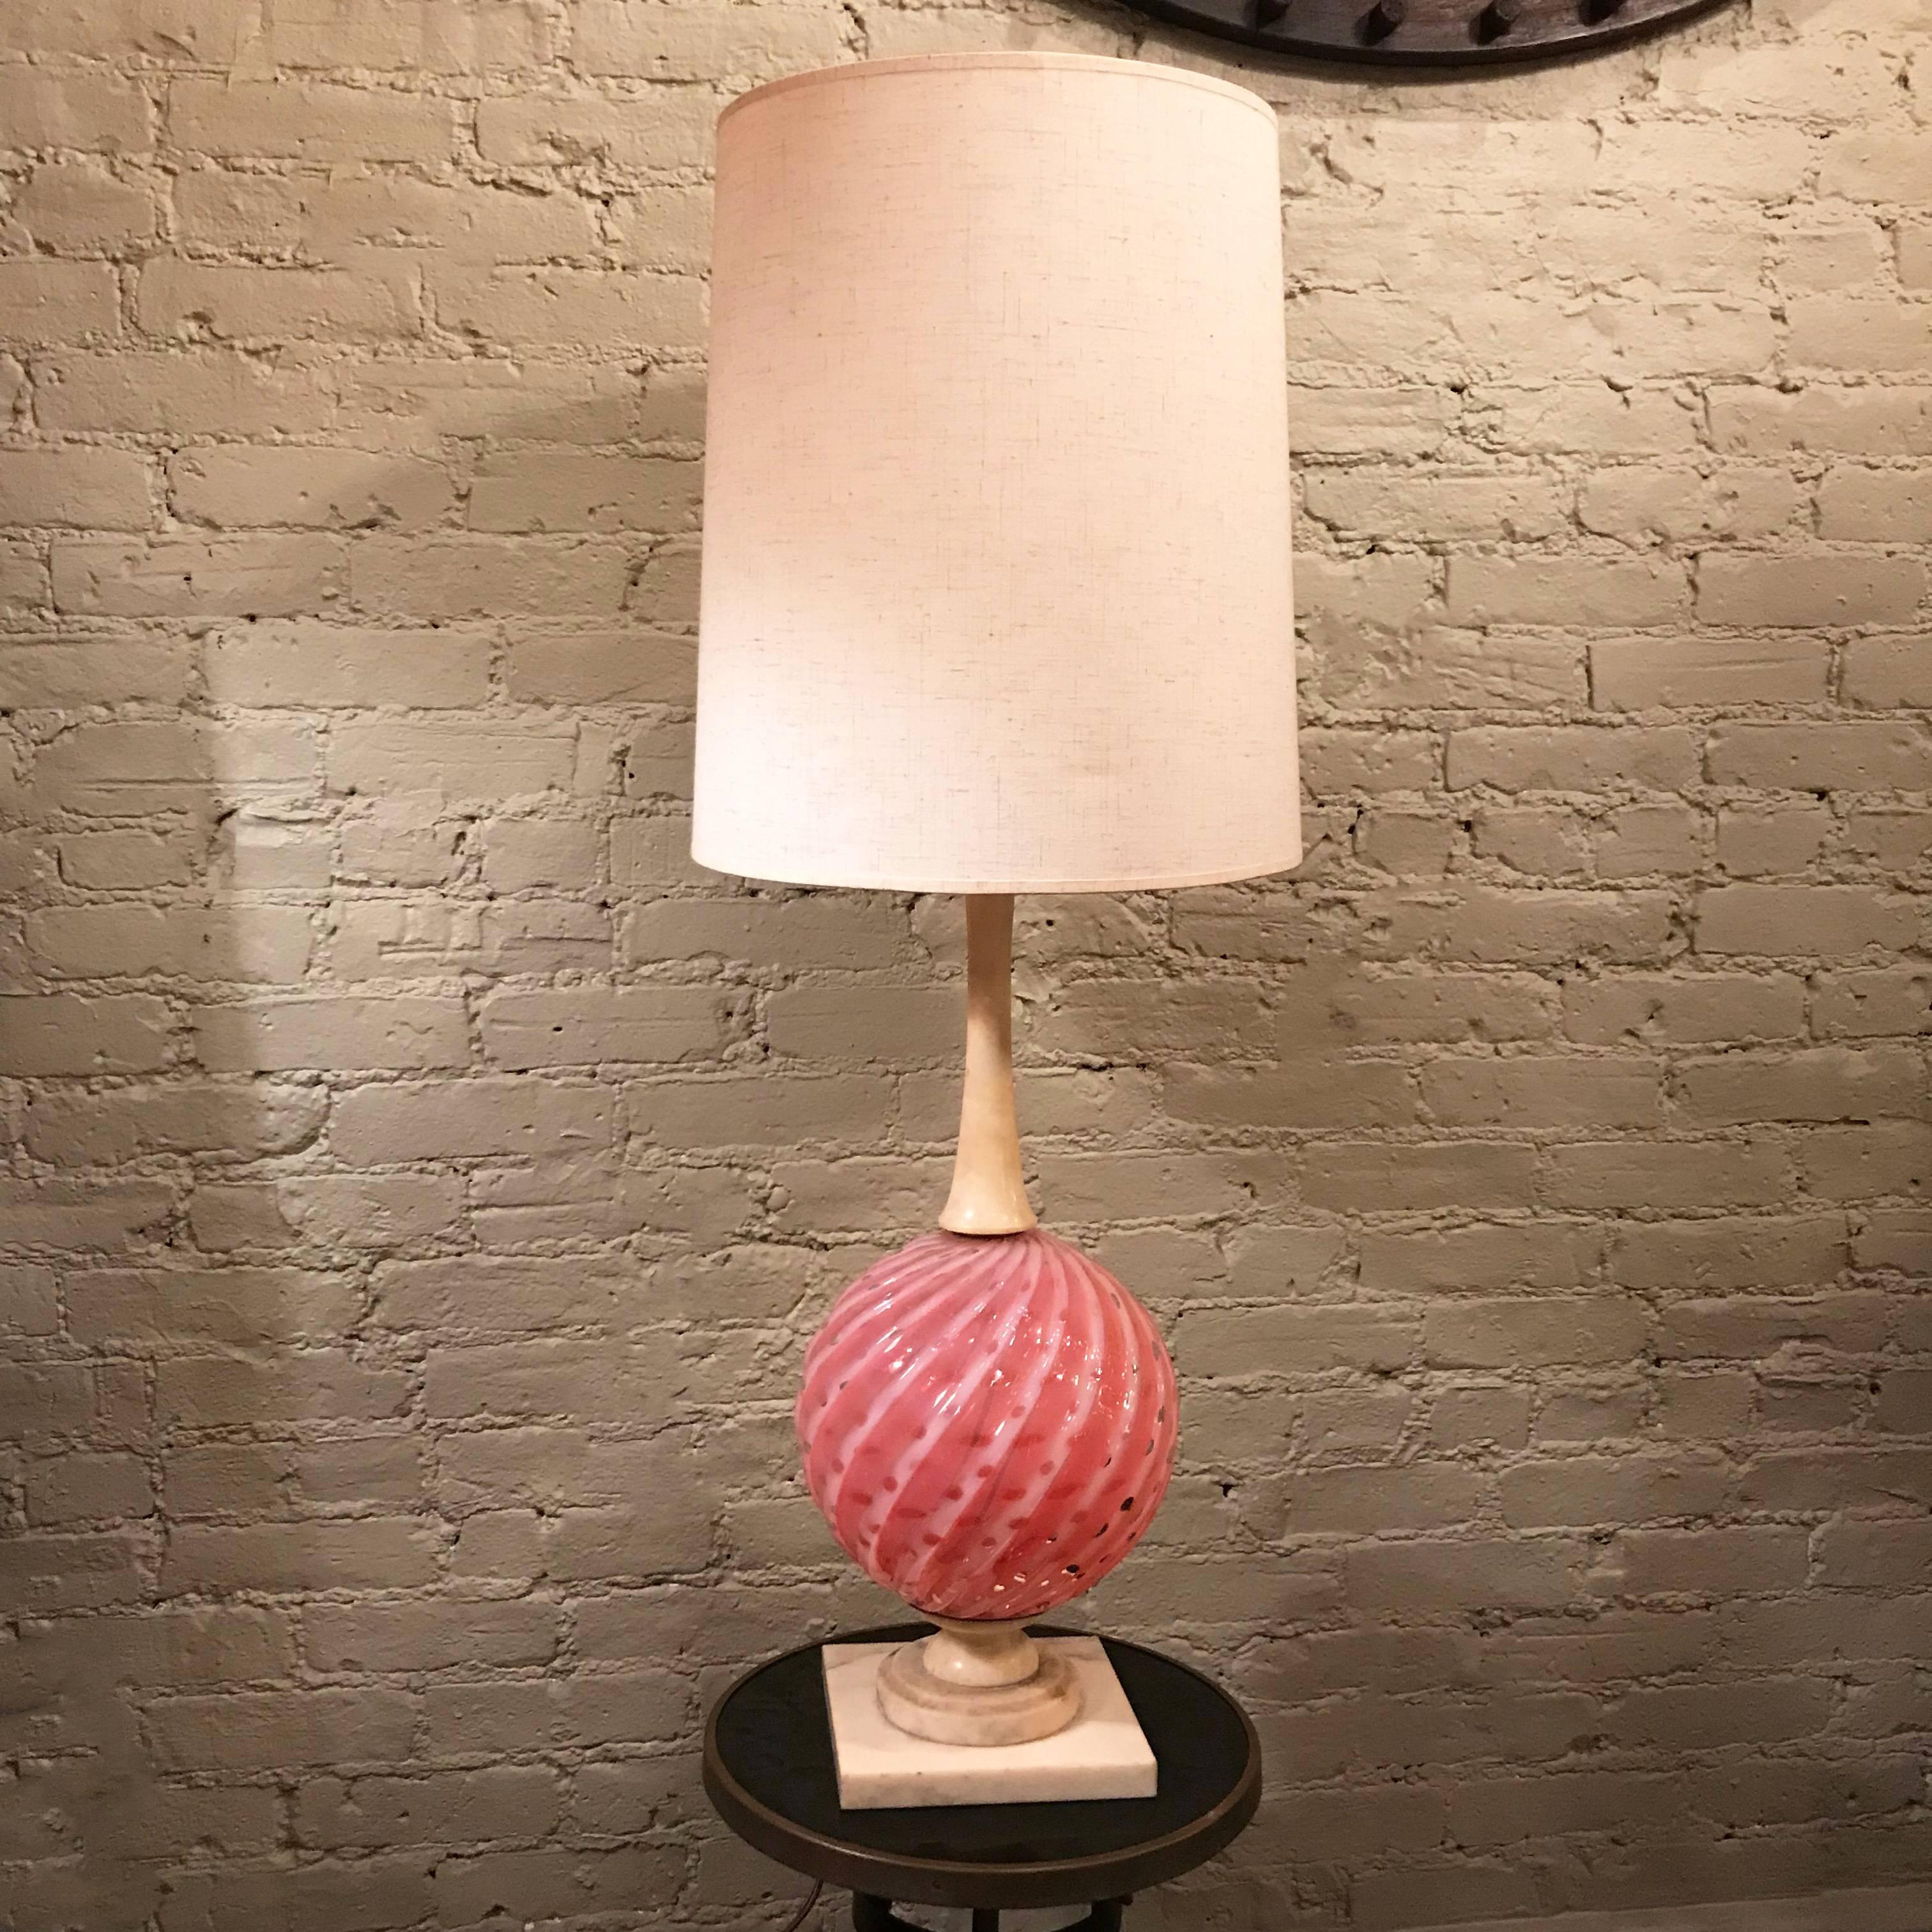 Italian, midcentury, Hollywood Regency table lamp features a pink, swirled Murano glass globe between a sculpted marble base and stem with brass harp and finial. The lamp features three-way illumination alternating from top to bottom and altogether.